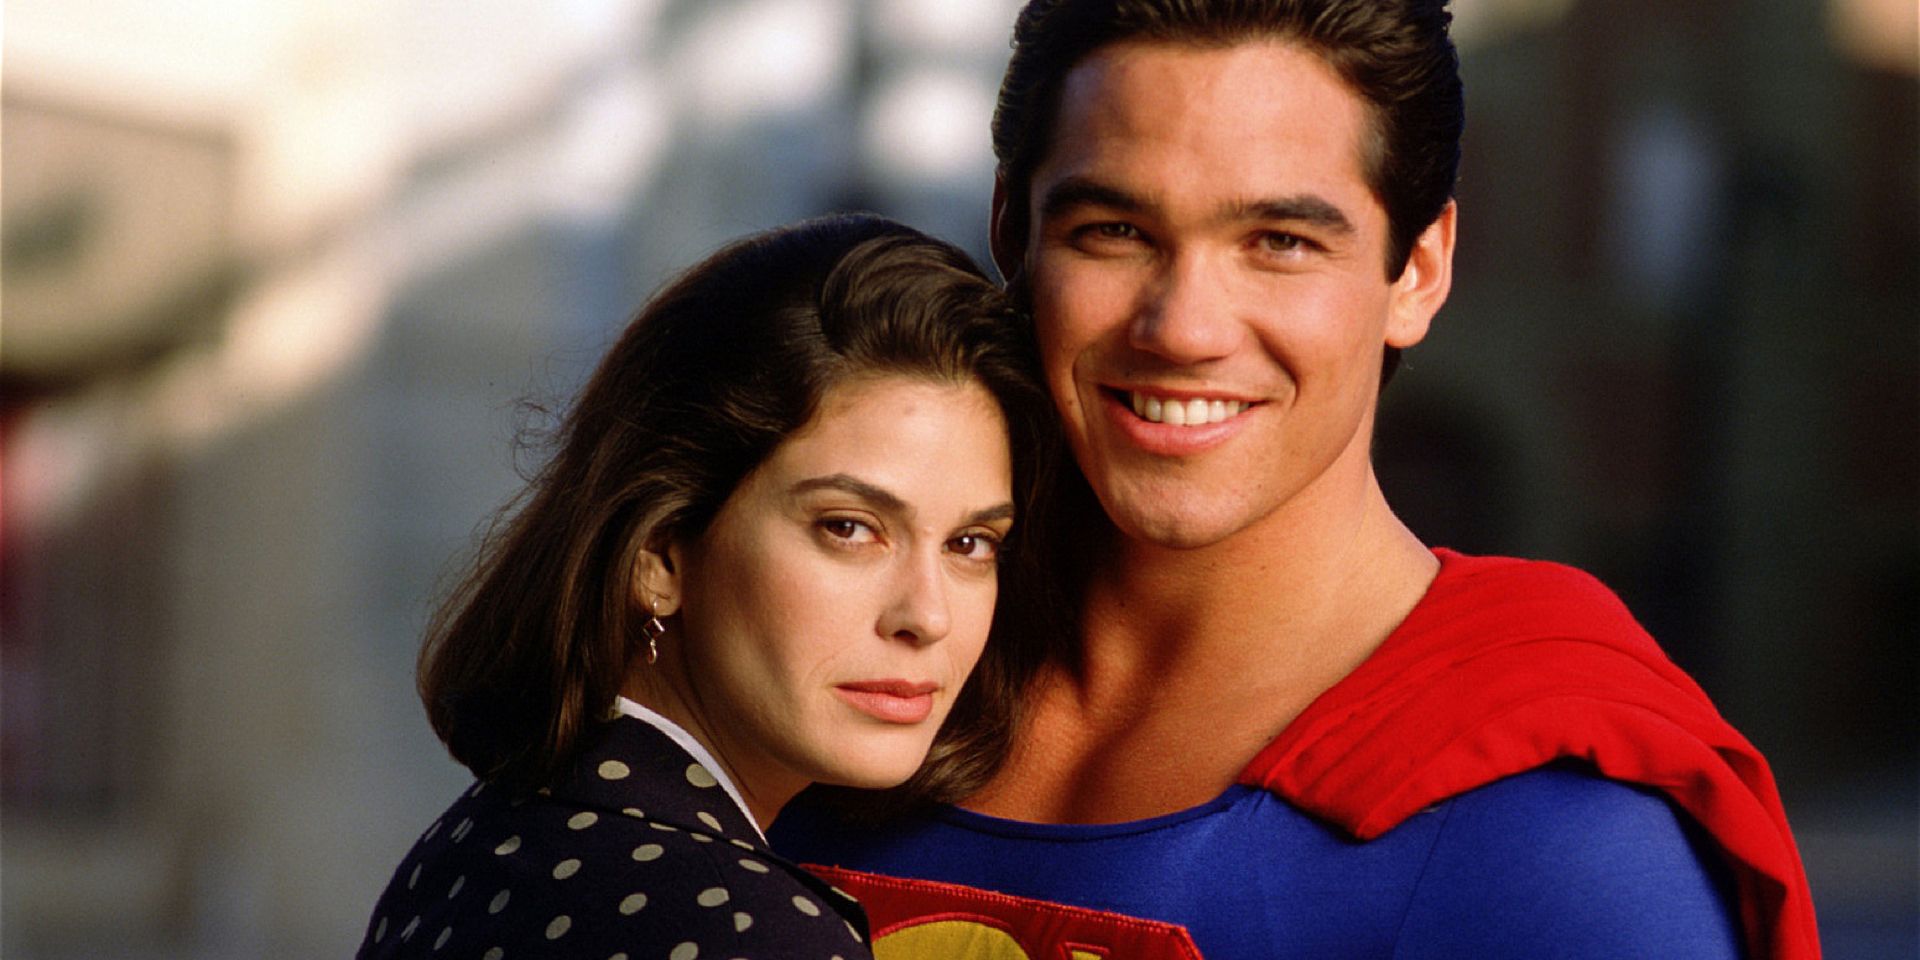 Lois Lane shares a hug with Clark Kent in The New Adventures Of Superman